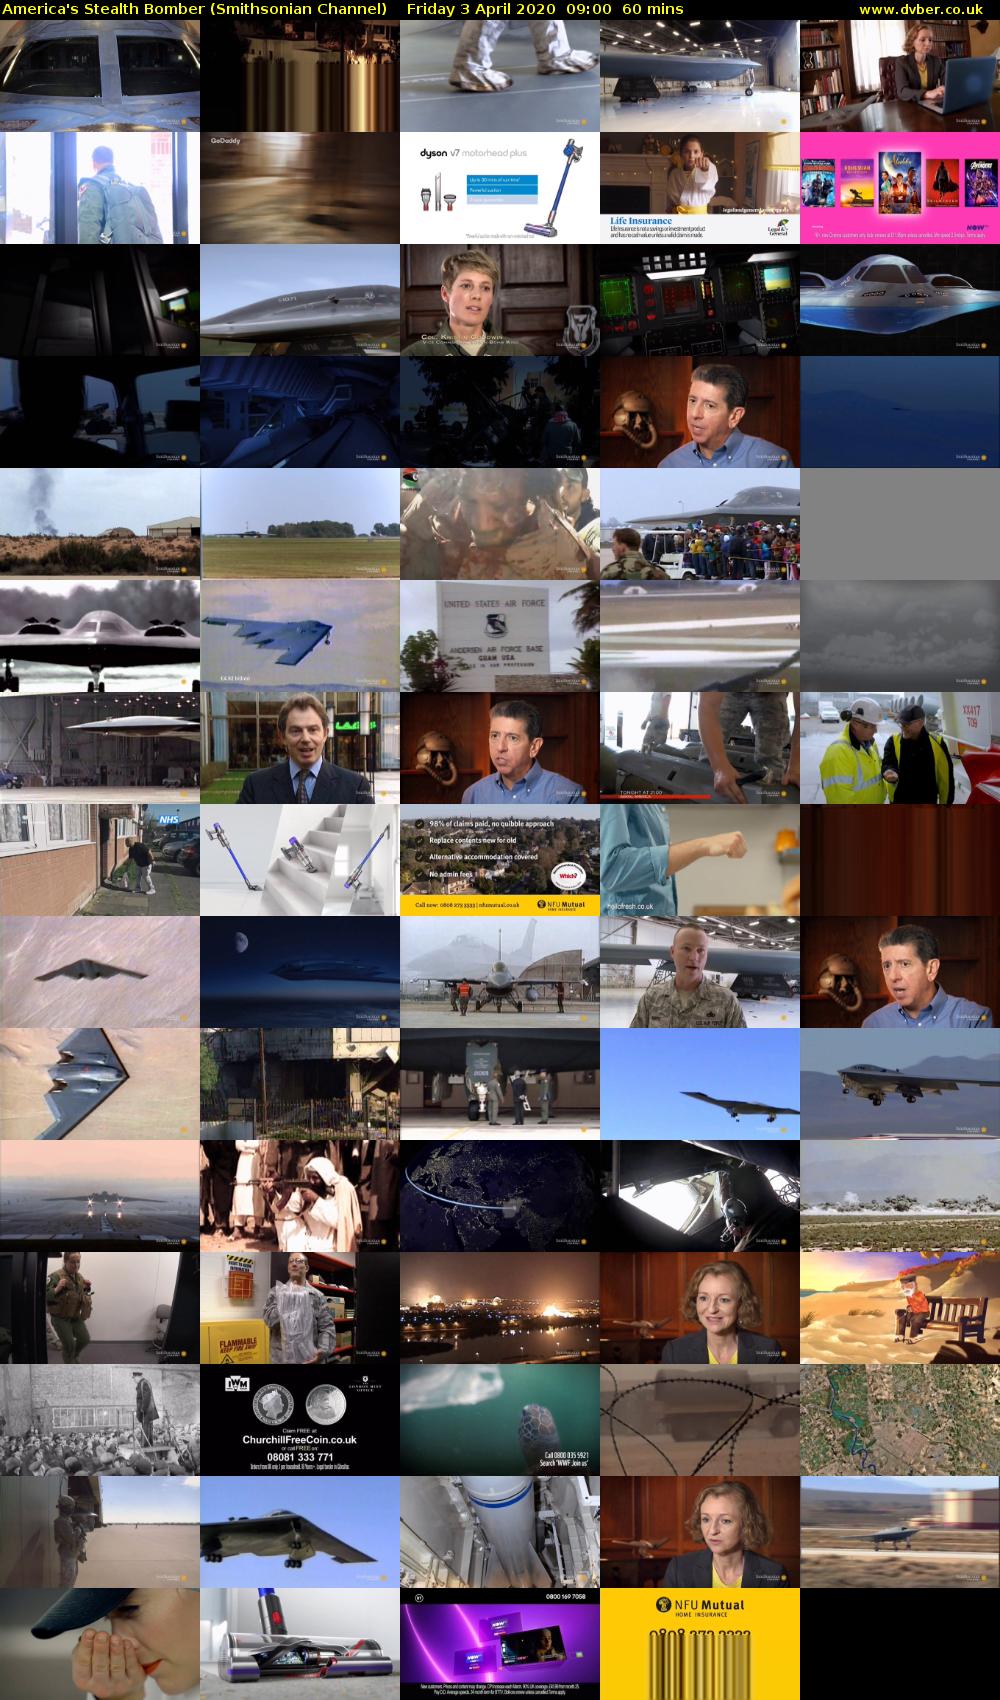 America's Stealth Bomber (Smithsonian Channel) Friday 3 April 2020 09:00 - 10:00